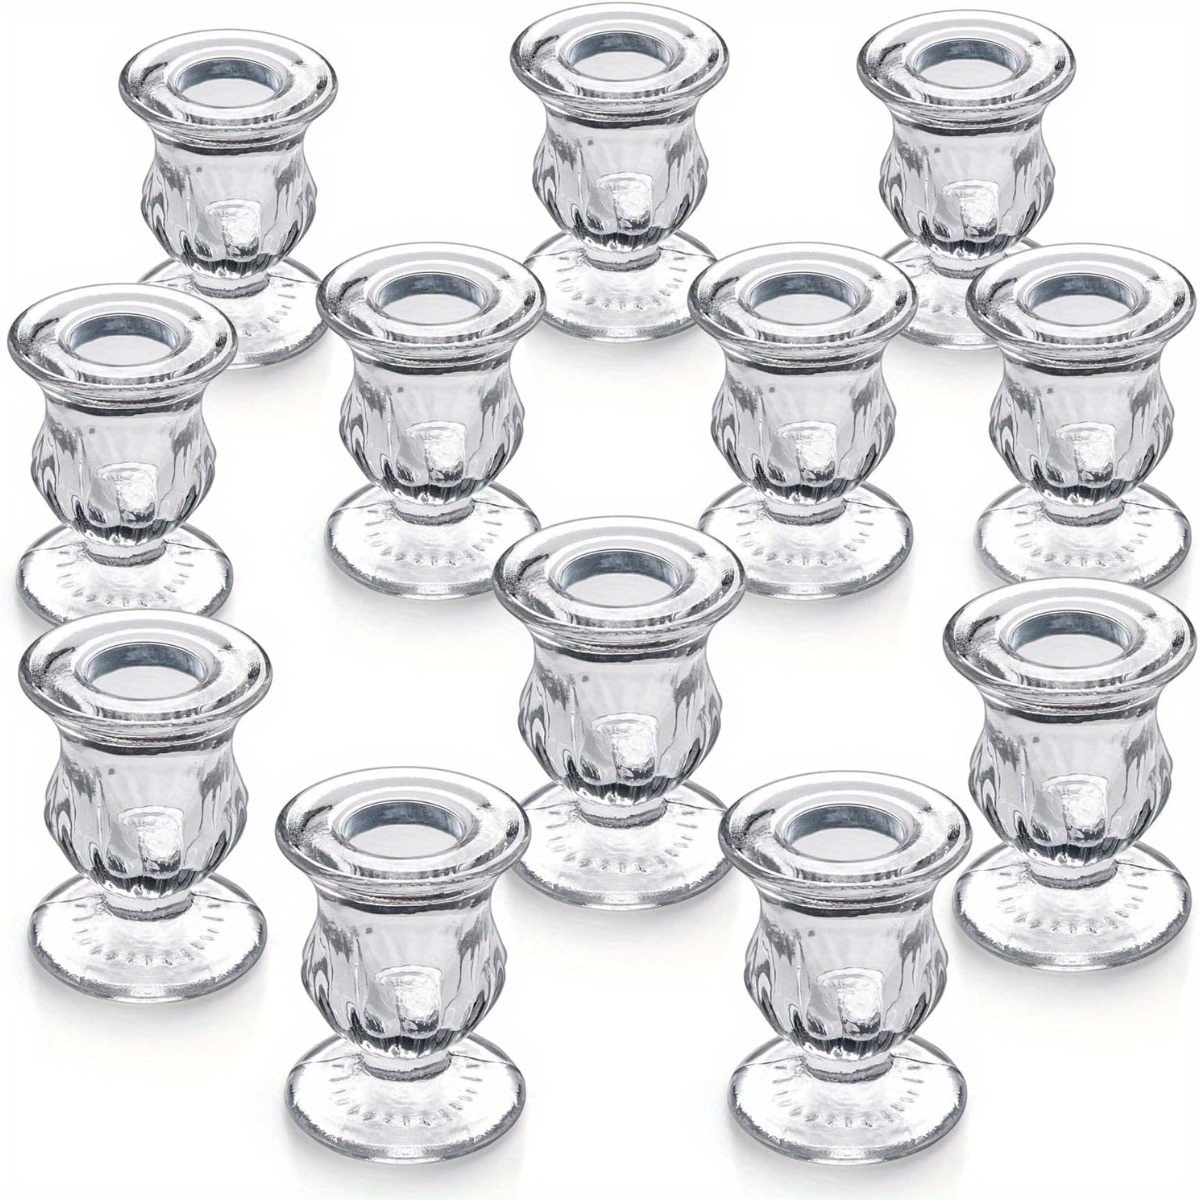 

12pcs Candlestick Holders Set Of Taper Candle Holders Bulk - Clear Glass Candle Holder For Rustic Wedding Centerpieces, Party Supplies